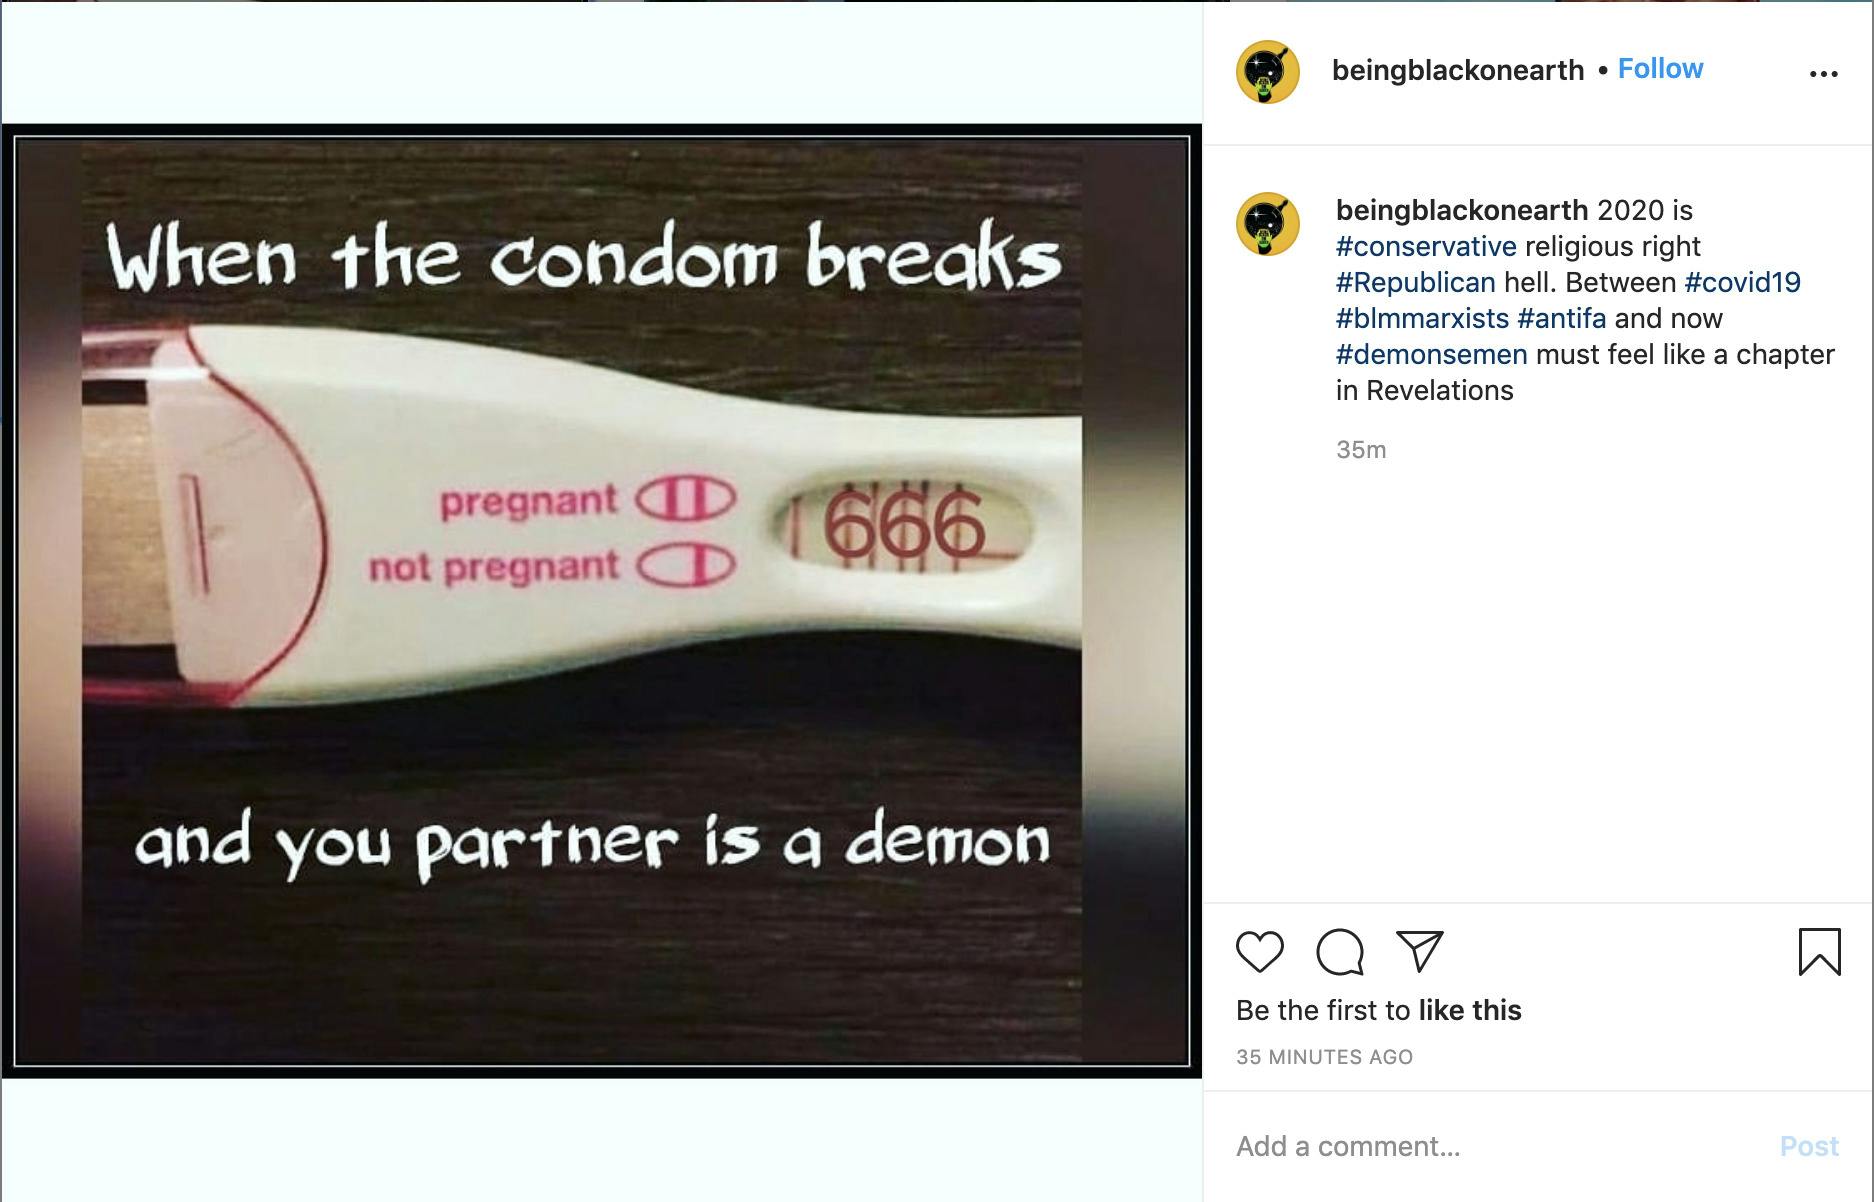 image of pregnancy test with 666 instead of plus and text "when the condom breaks and your partner is a demon" Caption "2020 is #conservative religious right #Republican hell. Between #covid19 #blmmarxists #antifa and now #demonsemen must feel like a chapter in Revelations"